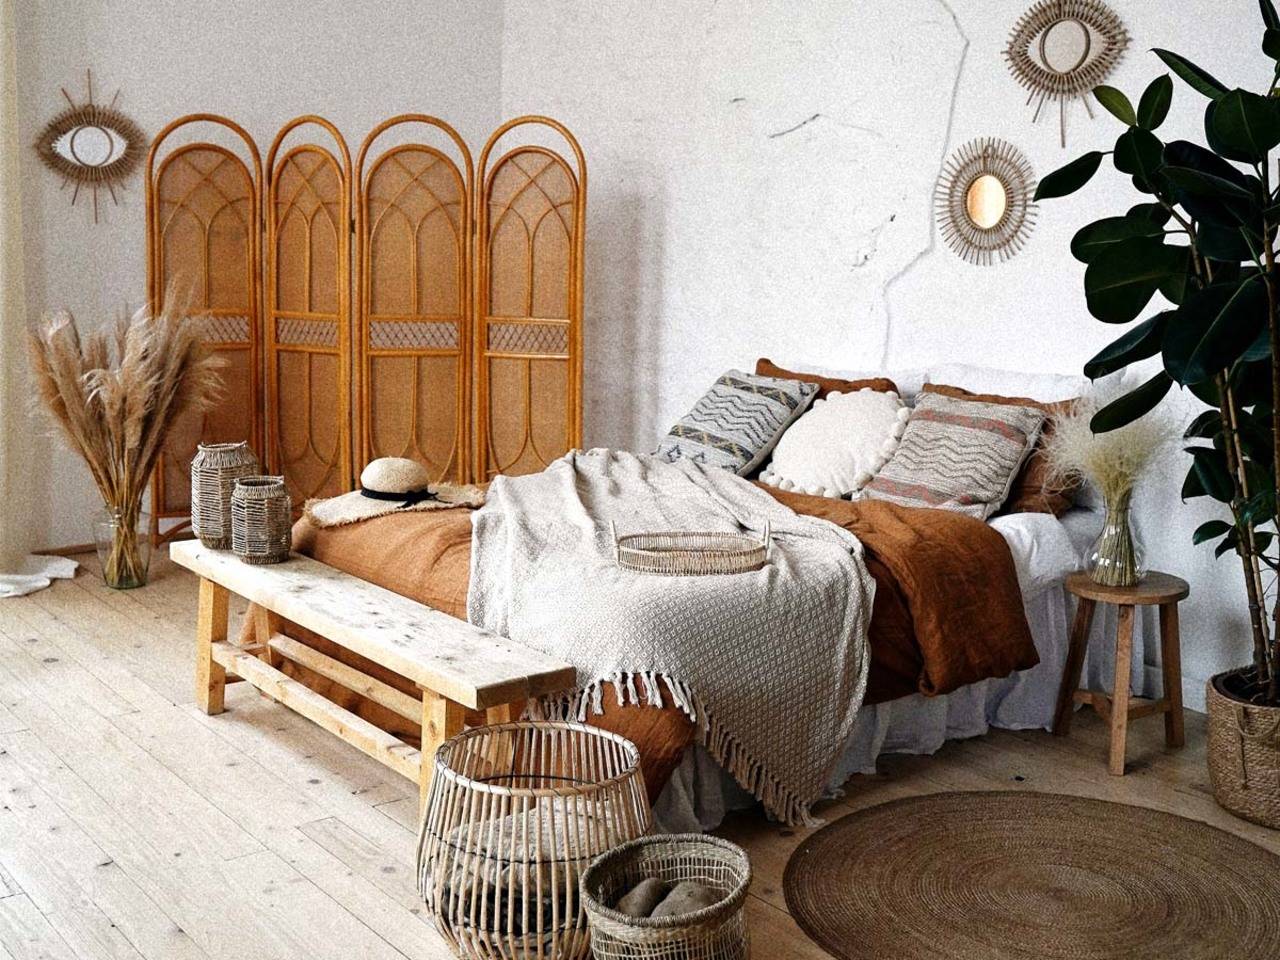 Bedroom décor: Easy tips for decorating a bedroom - Times of India